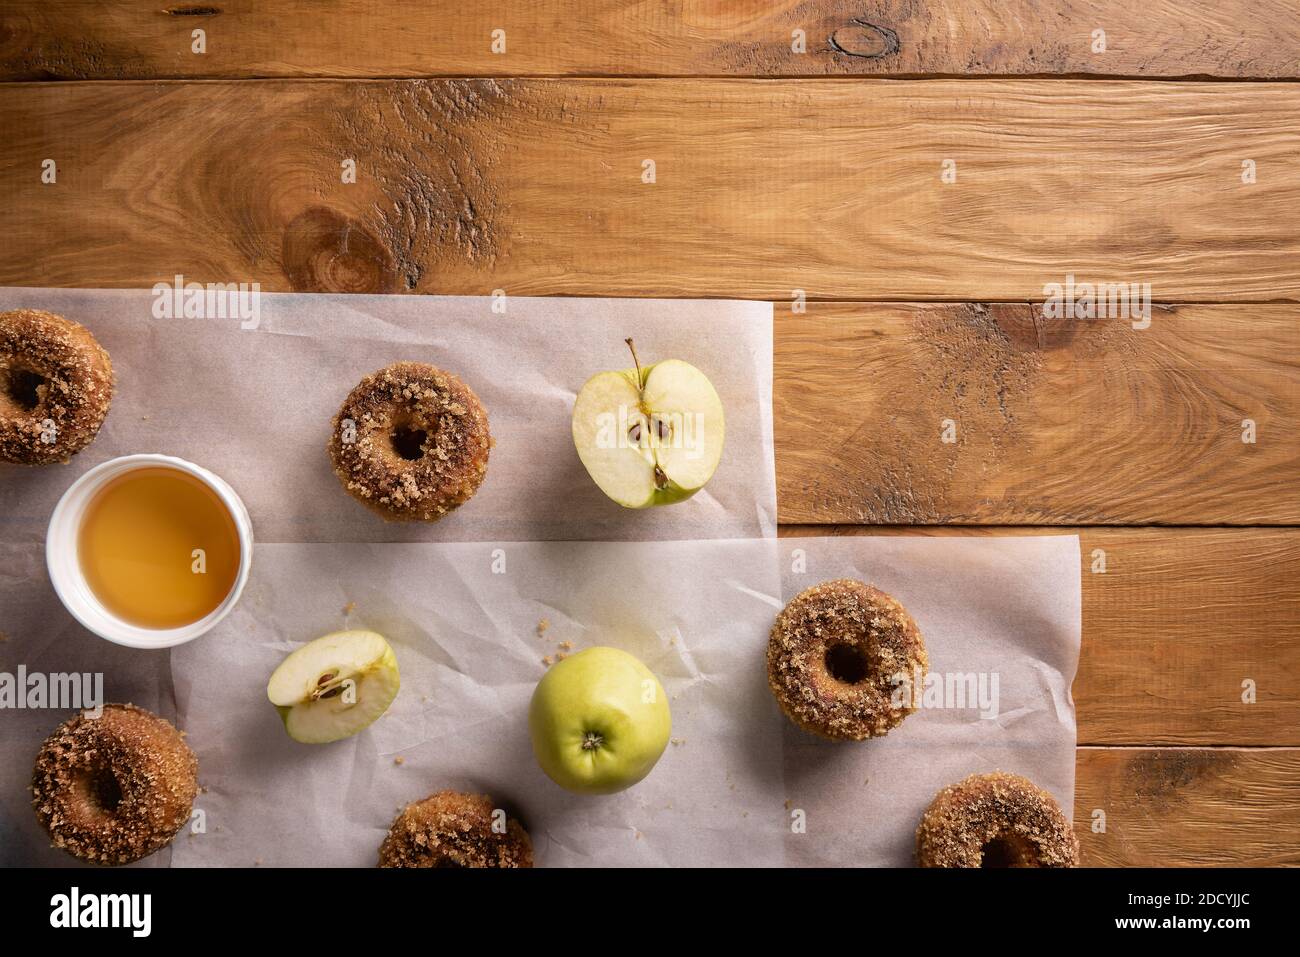 Baked apple cider donuts with apple fruits and cider on baking sheets on natural wooden table. Ready to eat snack. Small batch of homemade food. Direc Stock Photo